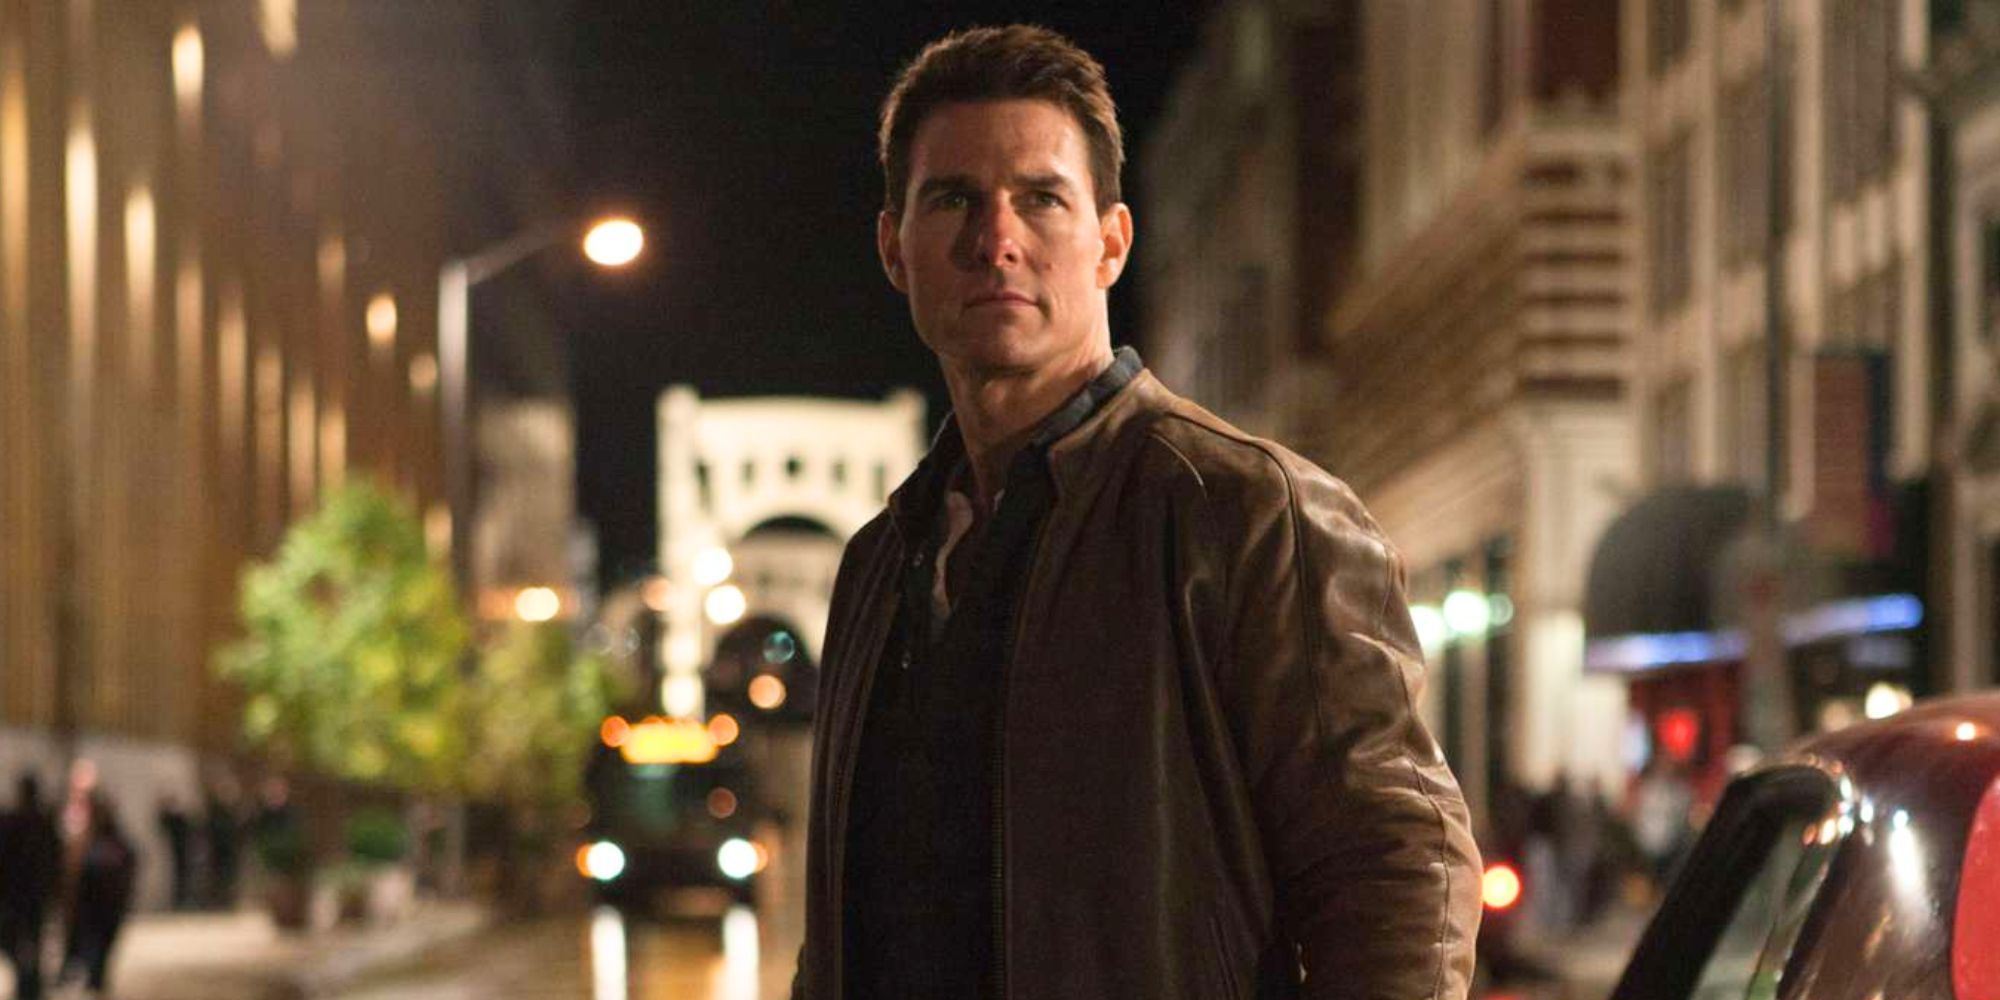 Tom Cruise as Jack Reacher looking confident in the 2012 movie.